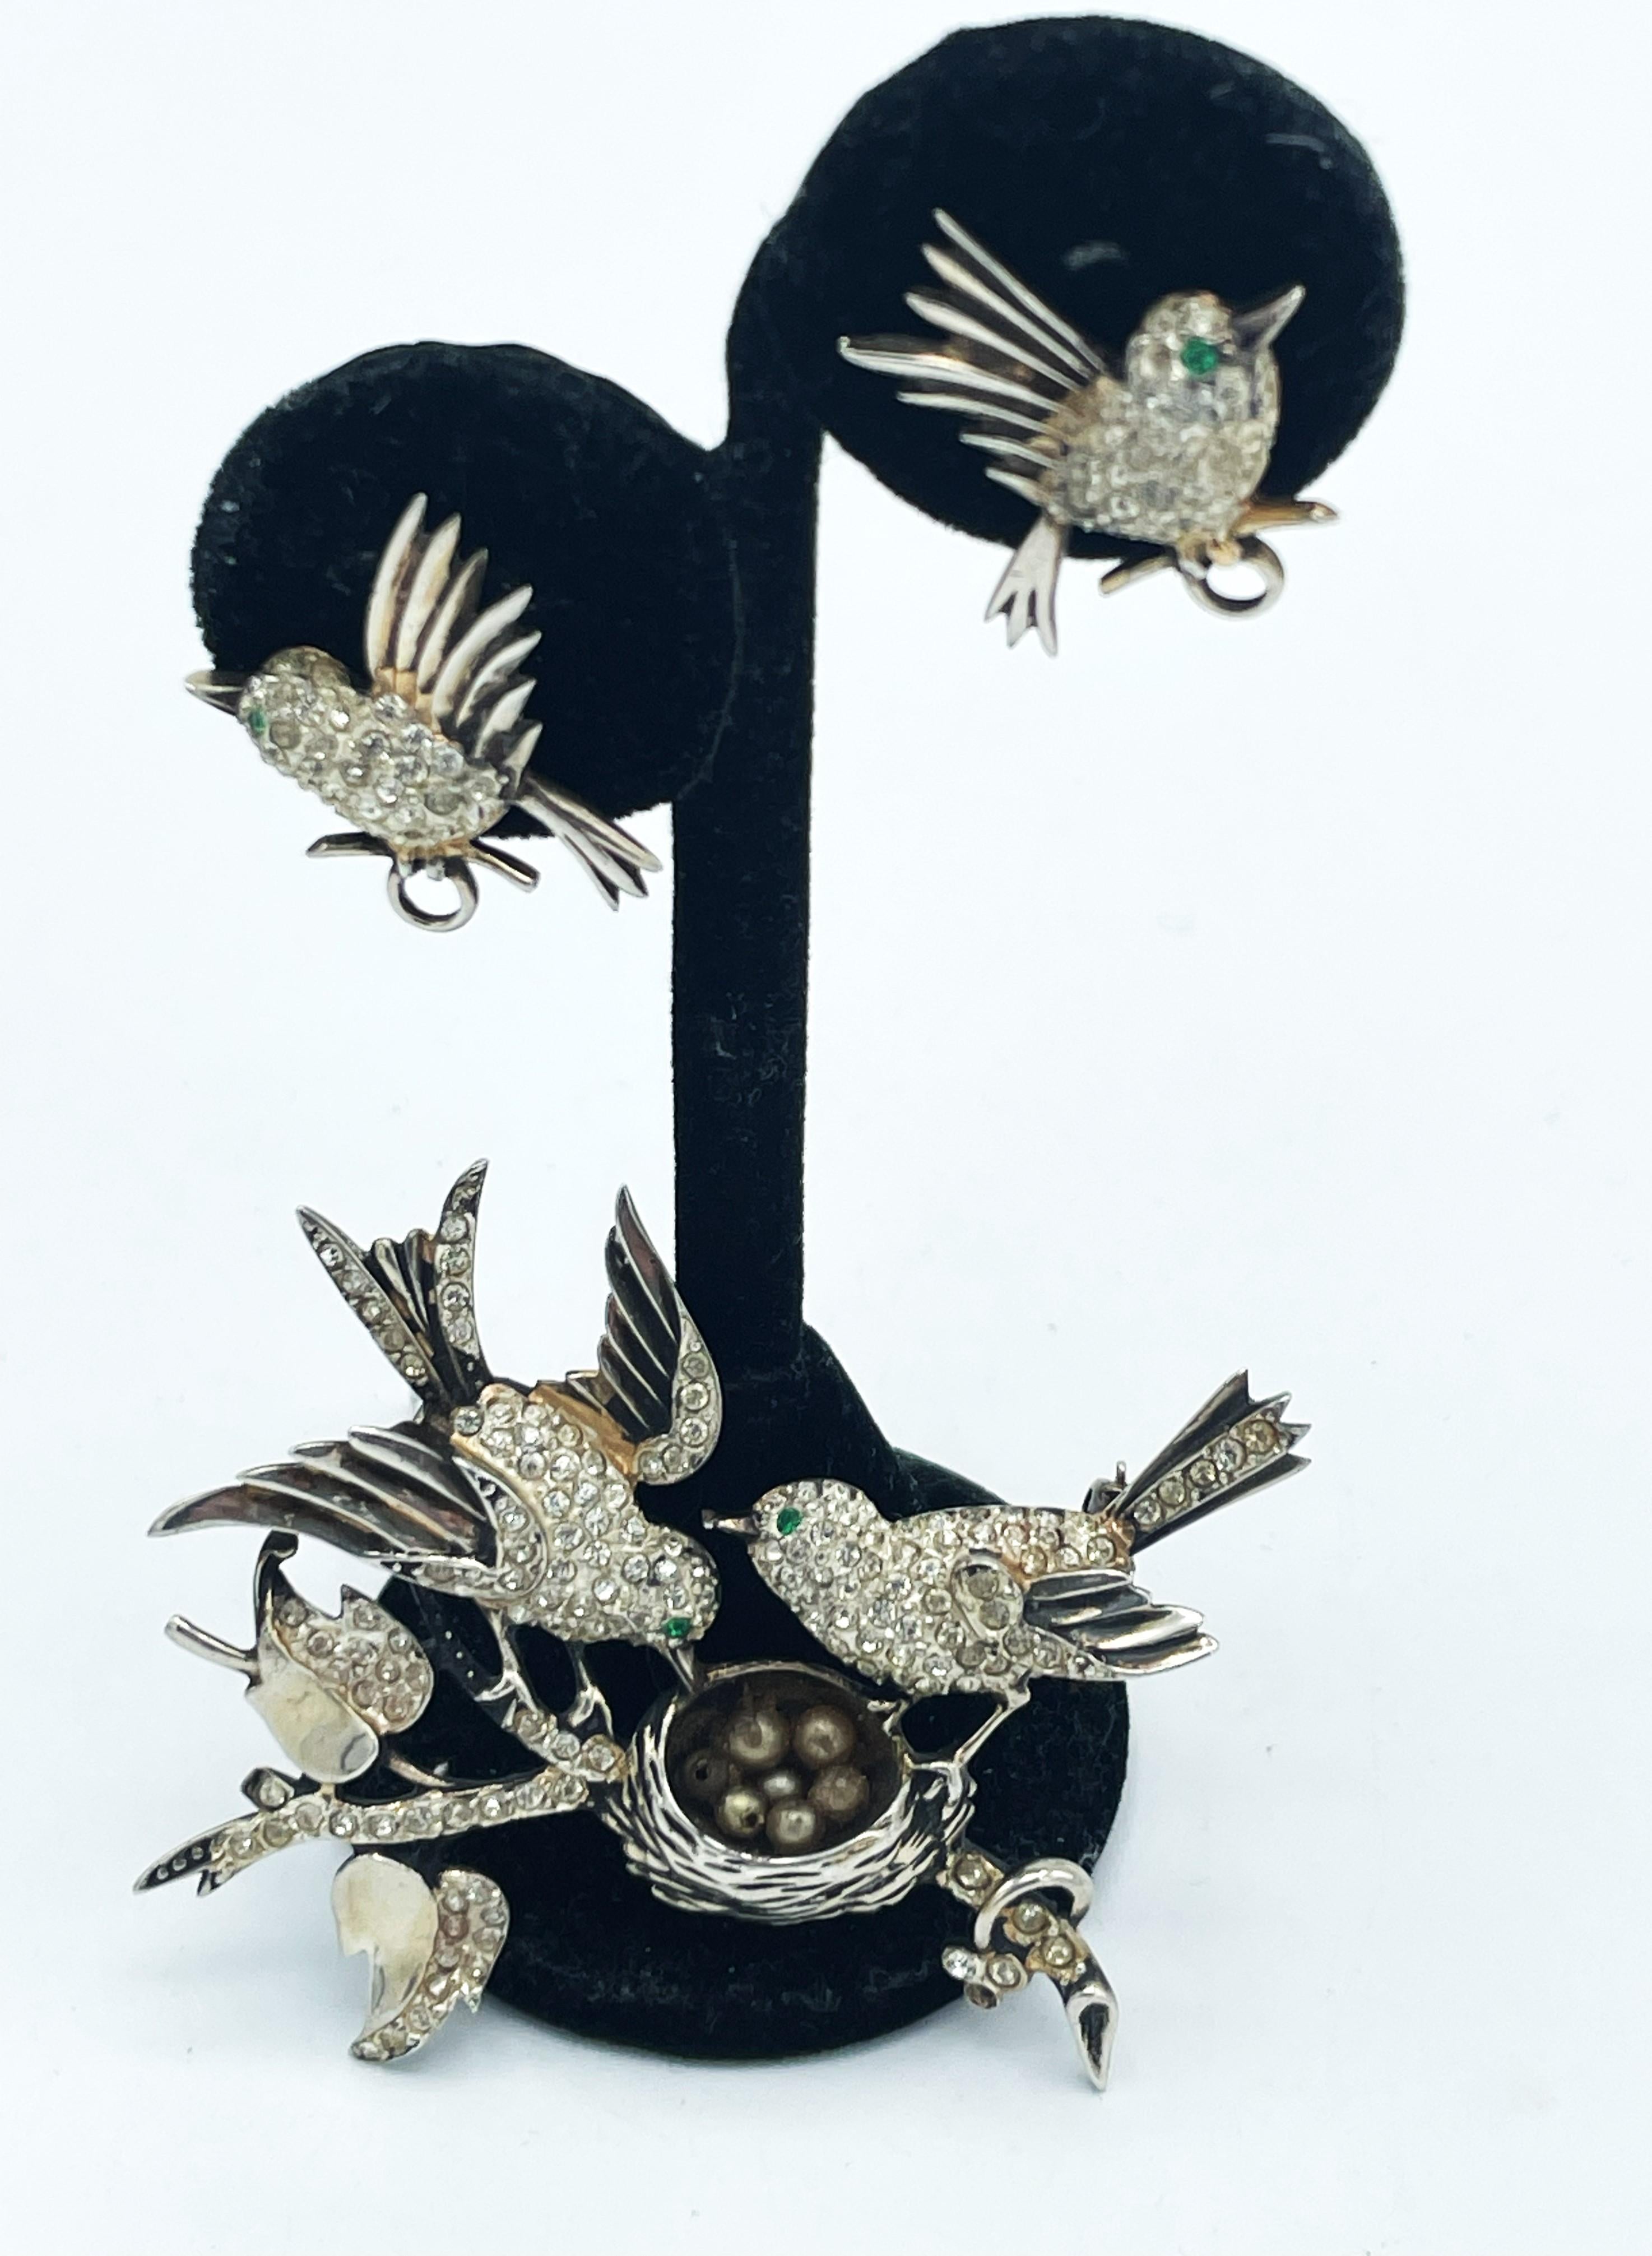 Brooch of a pair of birds sitting on a branch with a nest, matching 2 small bird ear clips that are already fledged.
Signed 'house of Schrager Creation NY' Sterling 1940. The birds, leaves and branches filled with the smallest